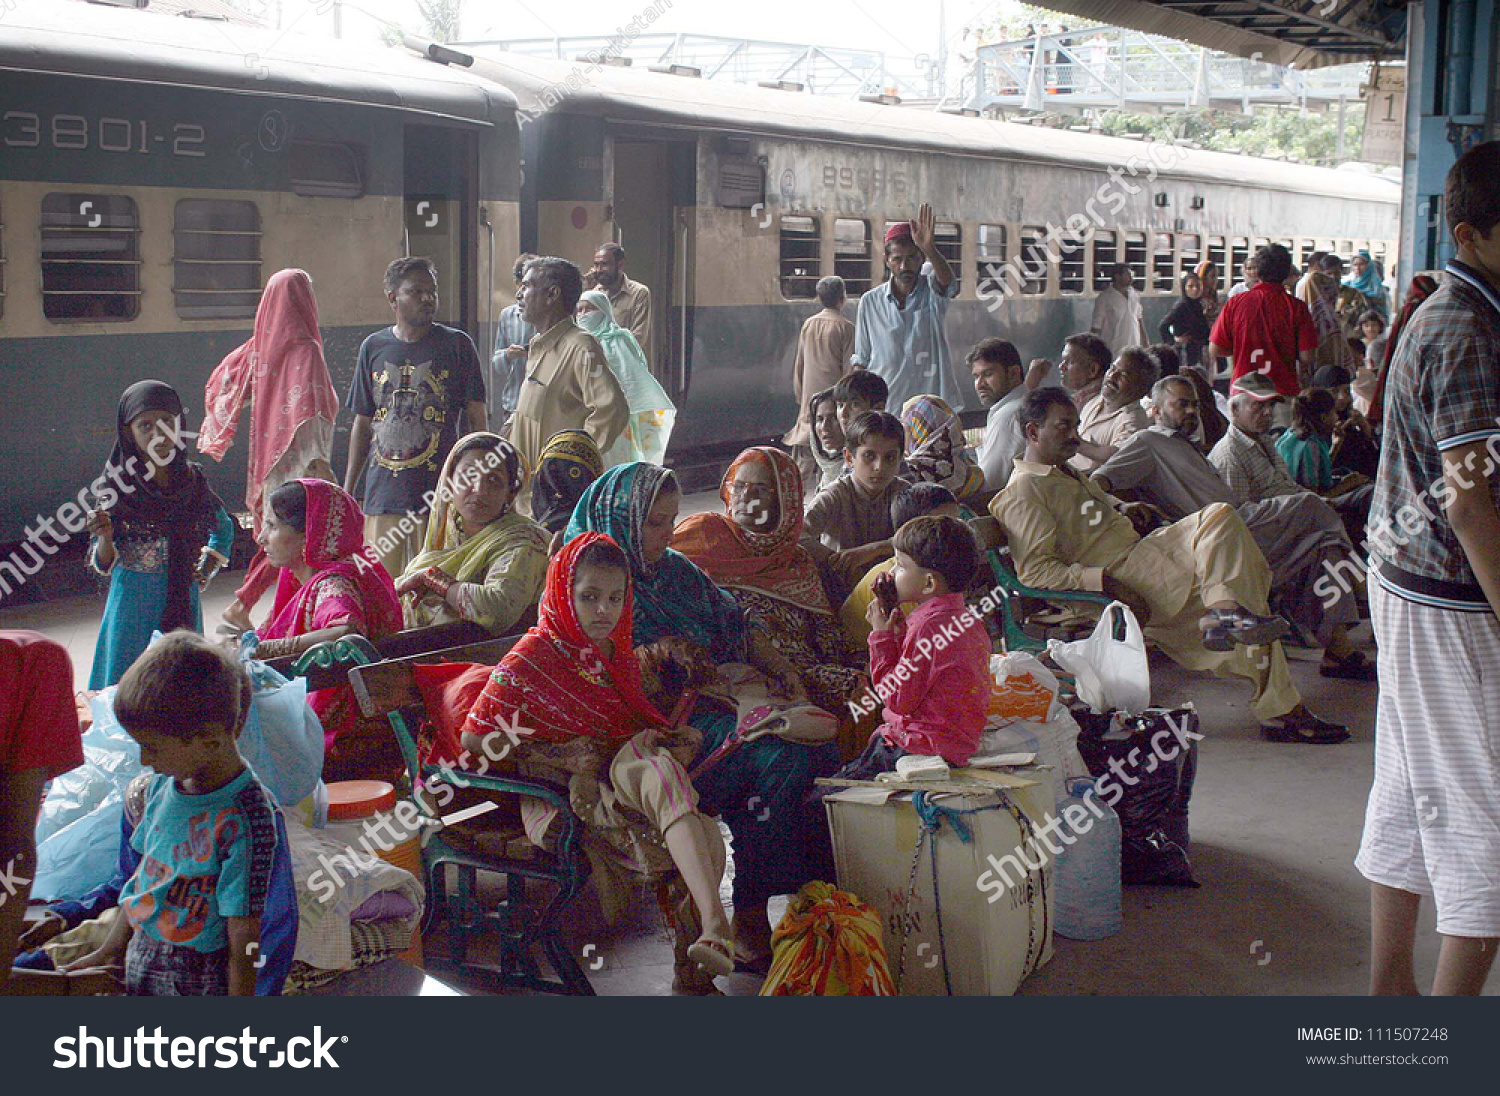 stock-photo-karachi-pakistan-aug-passengers-with-their-bags-gather-at-platform-as-trains-are-late-from-111507248.jpg